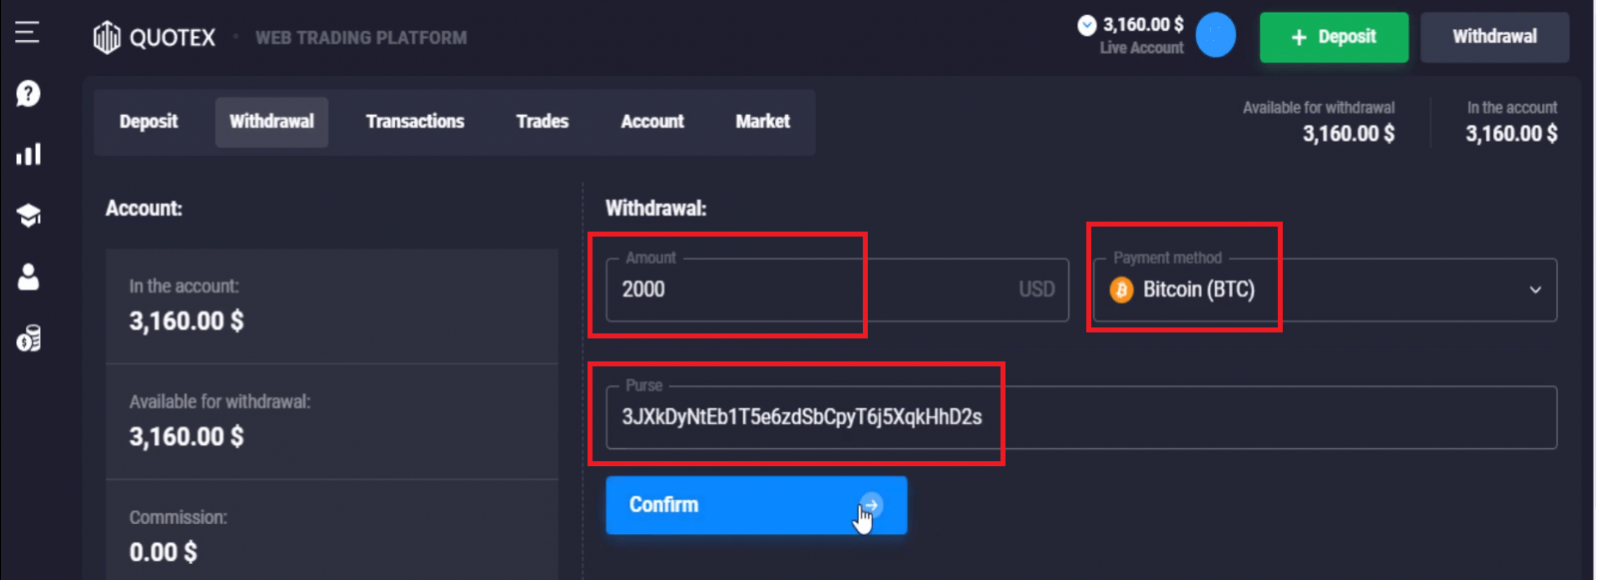 How to Sign in and Withdraw Money from Quotex